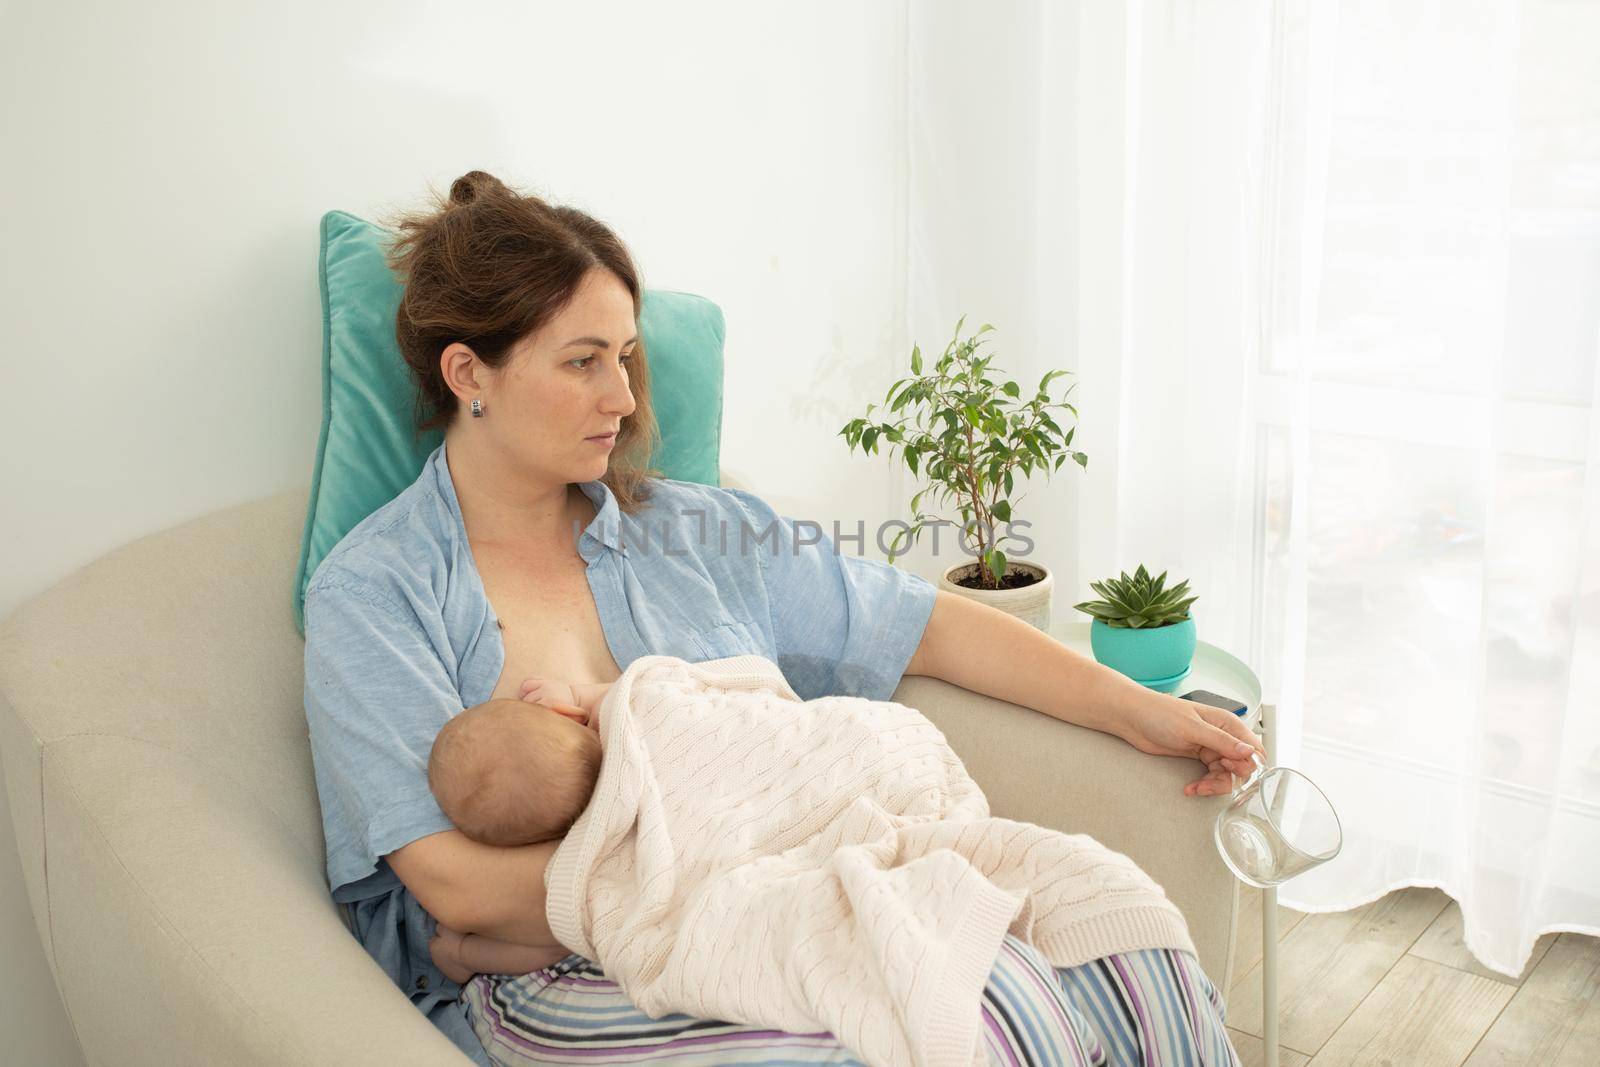 Woman drink water during process of breastfeeding of newborn baby. Comfortable and supported breastfeeding